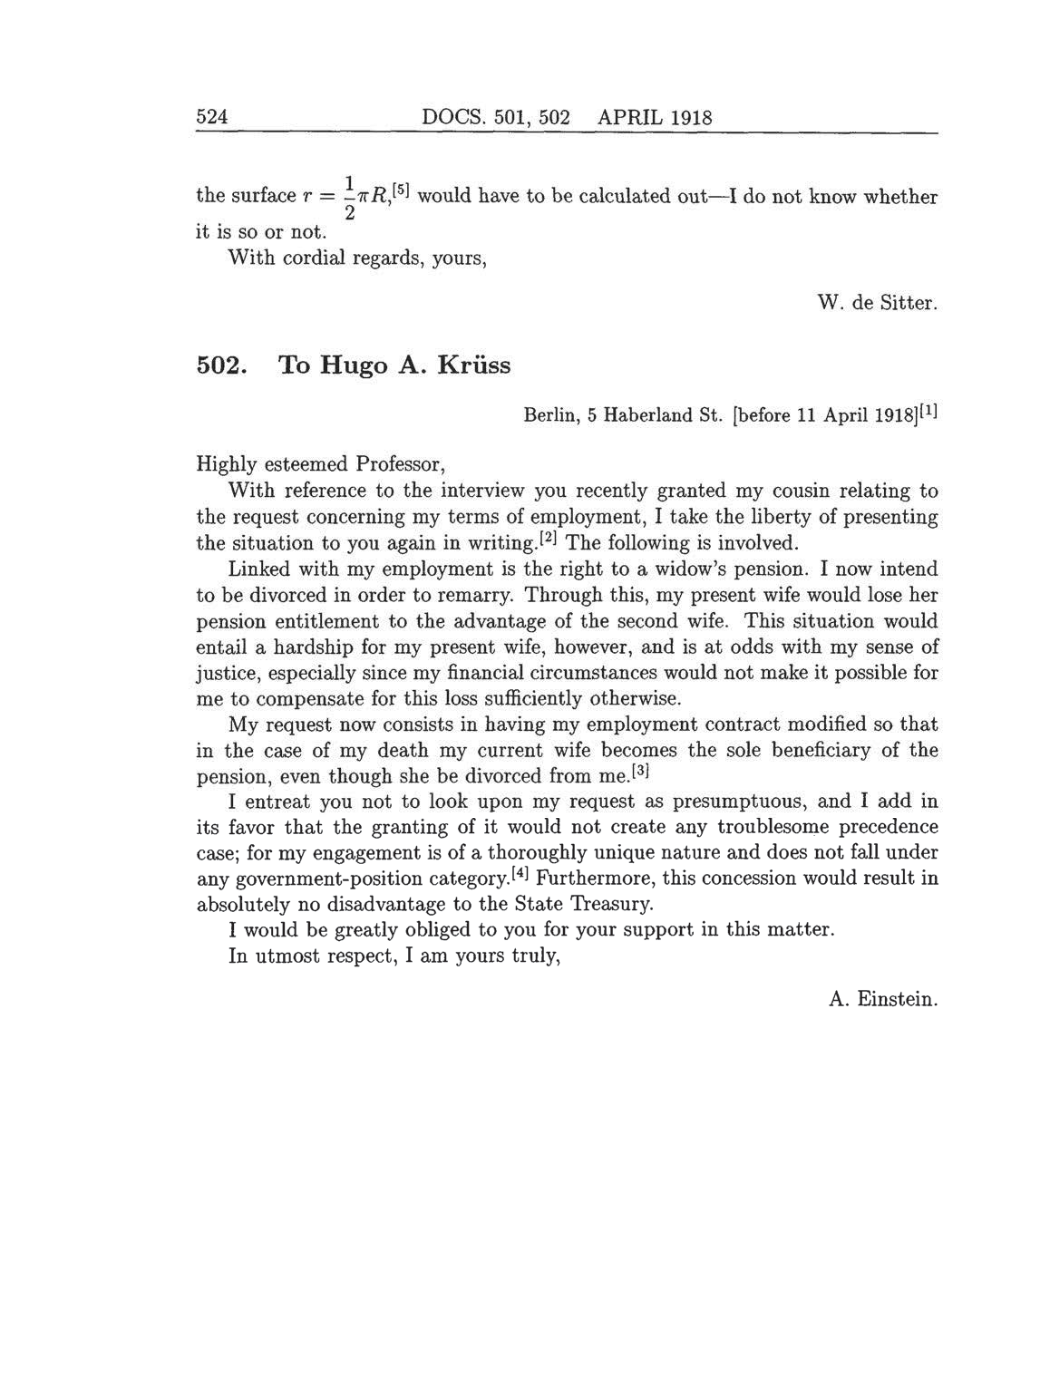 Volume 8: The Berlin Years: Correspondence, 1914-1918 (English translation supplement) page 524